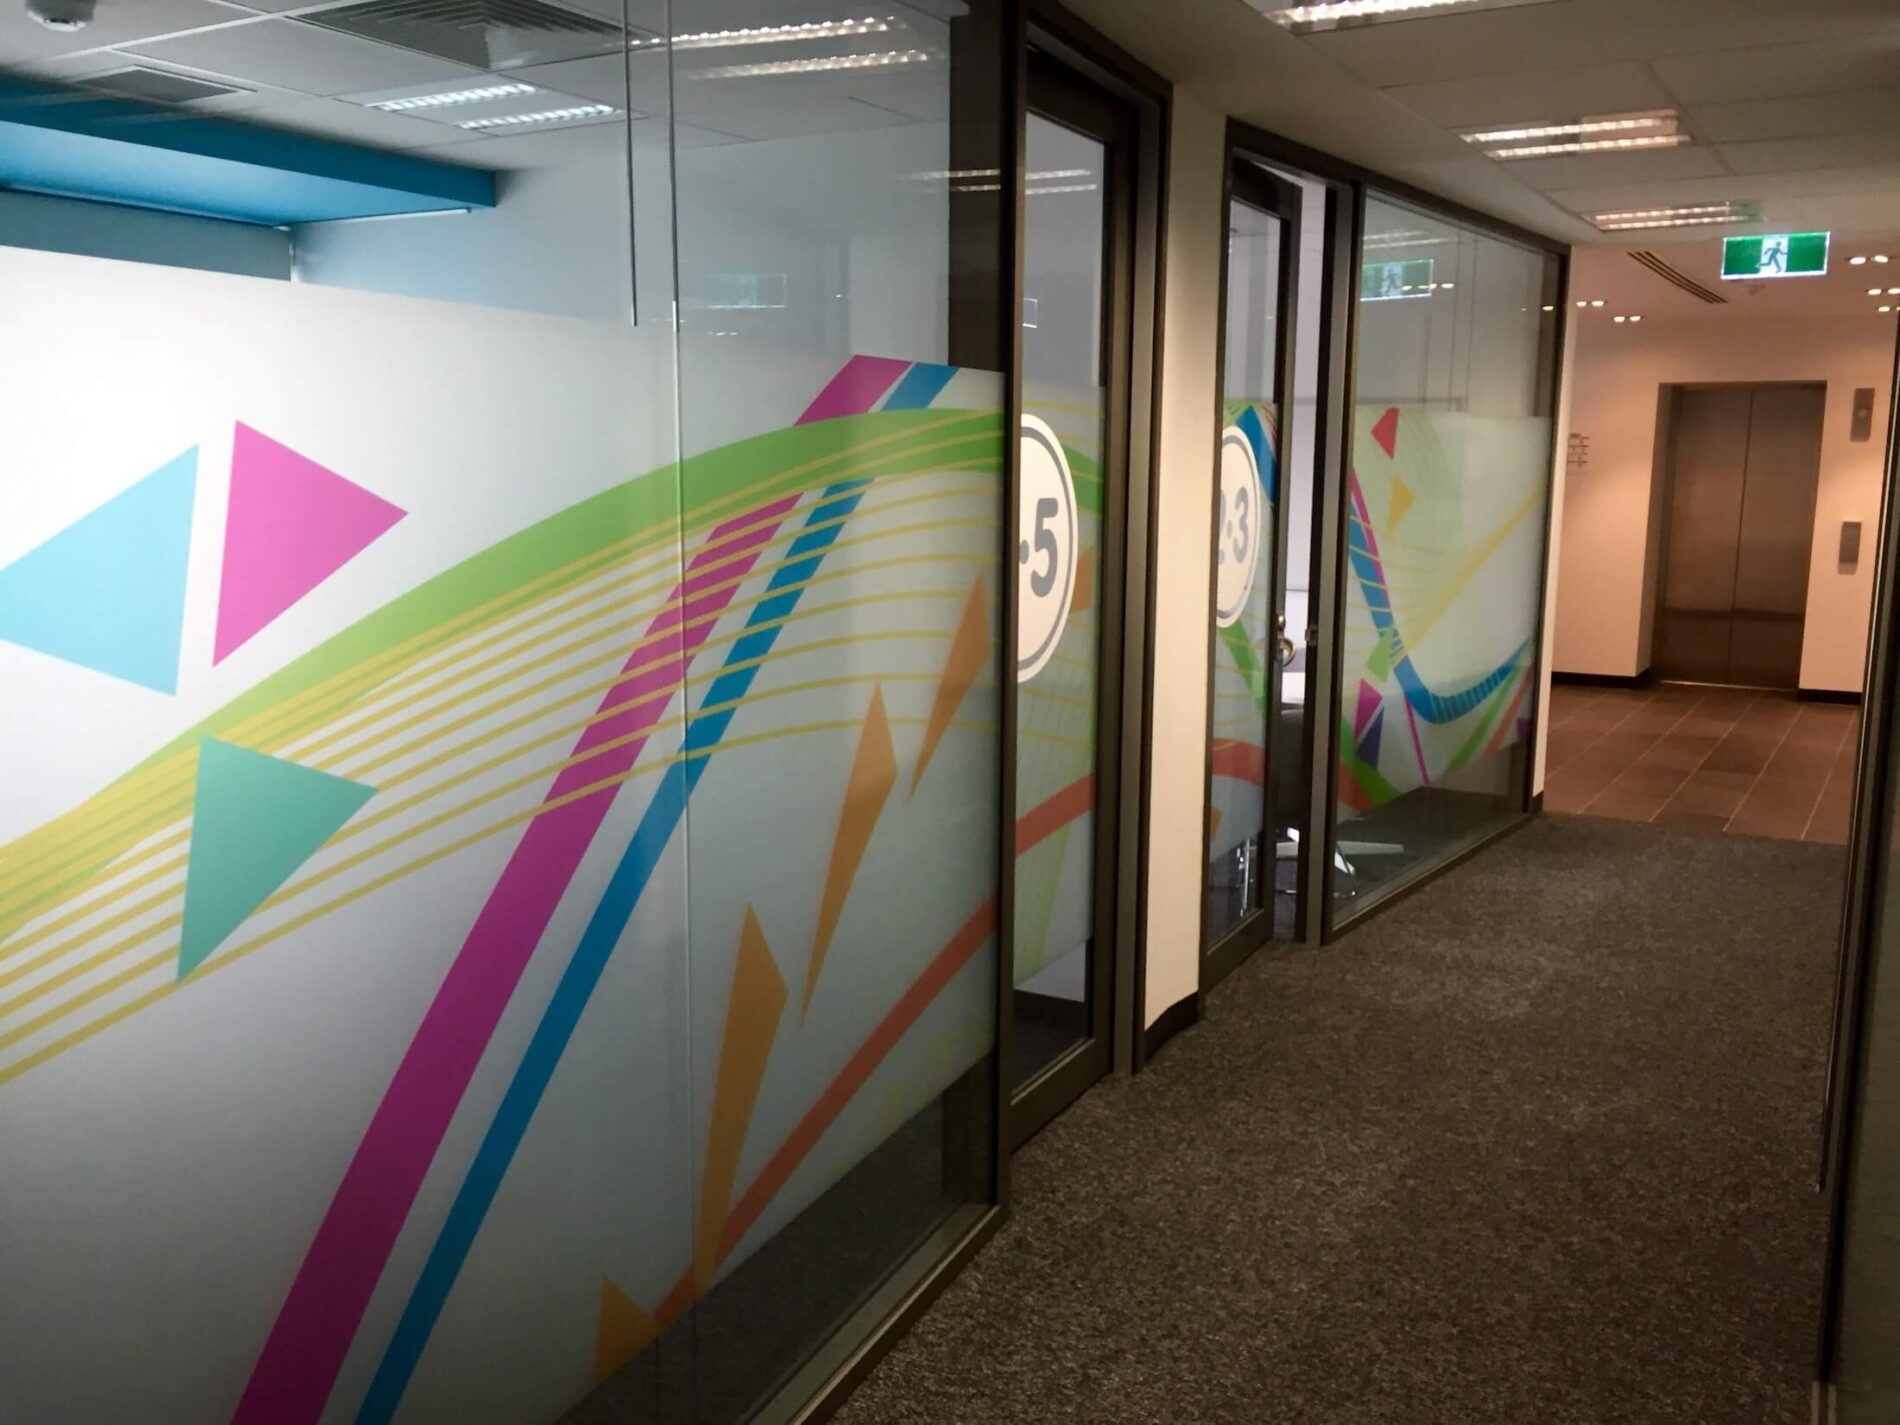 Colourful privacy decals on office glazing alongside hallway leading to lift